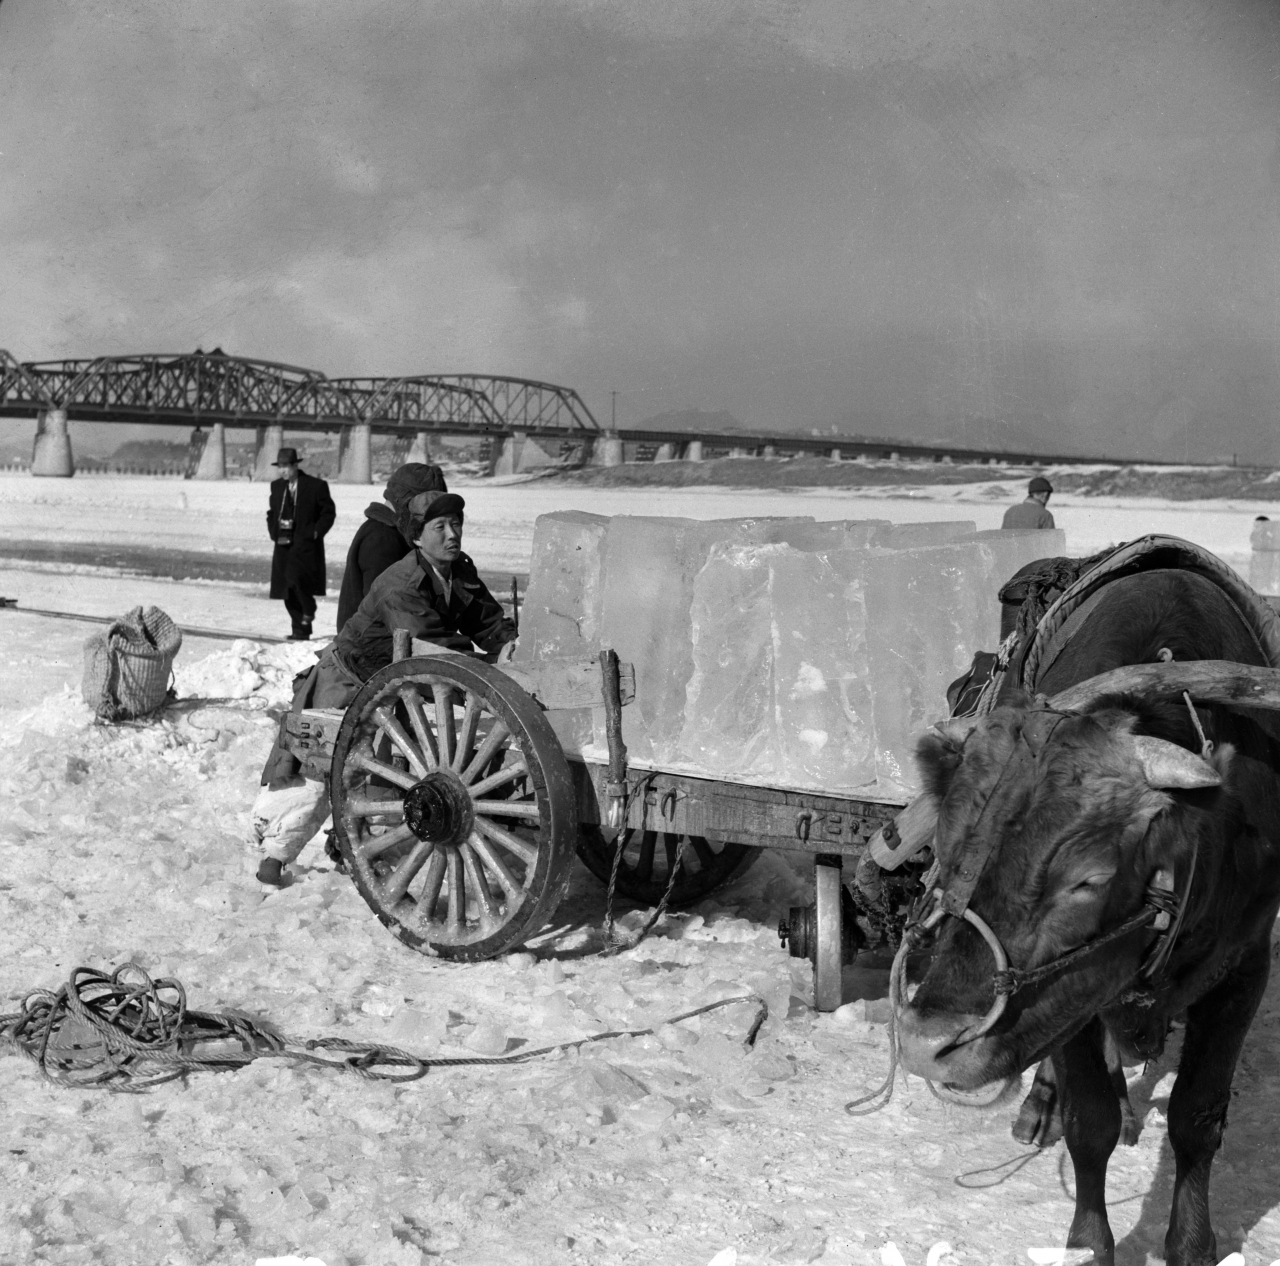 A cart is loaded with a hefty block of ice in this file photo take in 1957. (National Archives of Korea)